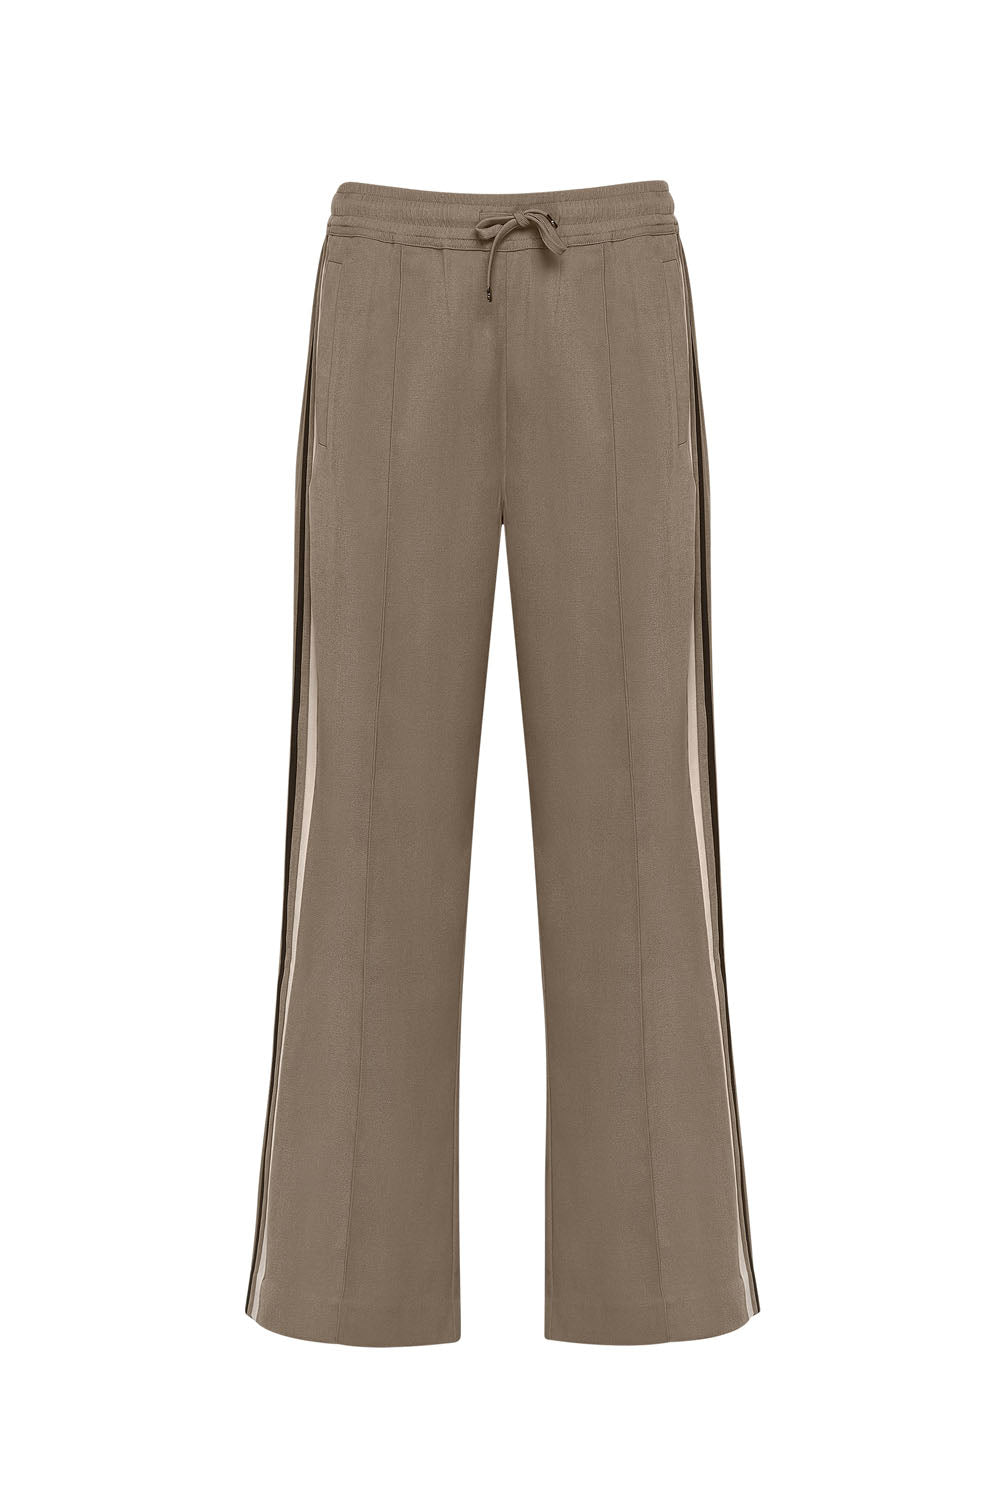 Madly Sweetly - Operator Pant (Taupe)